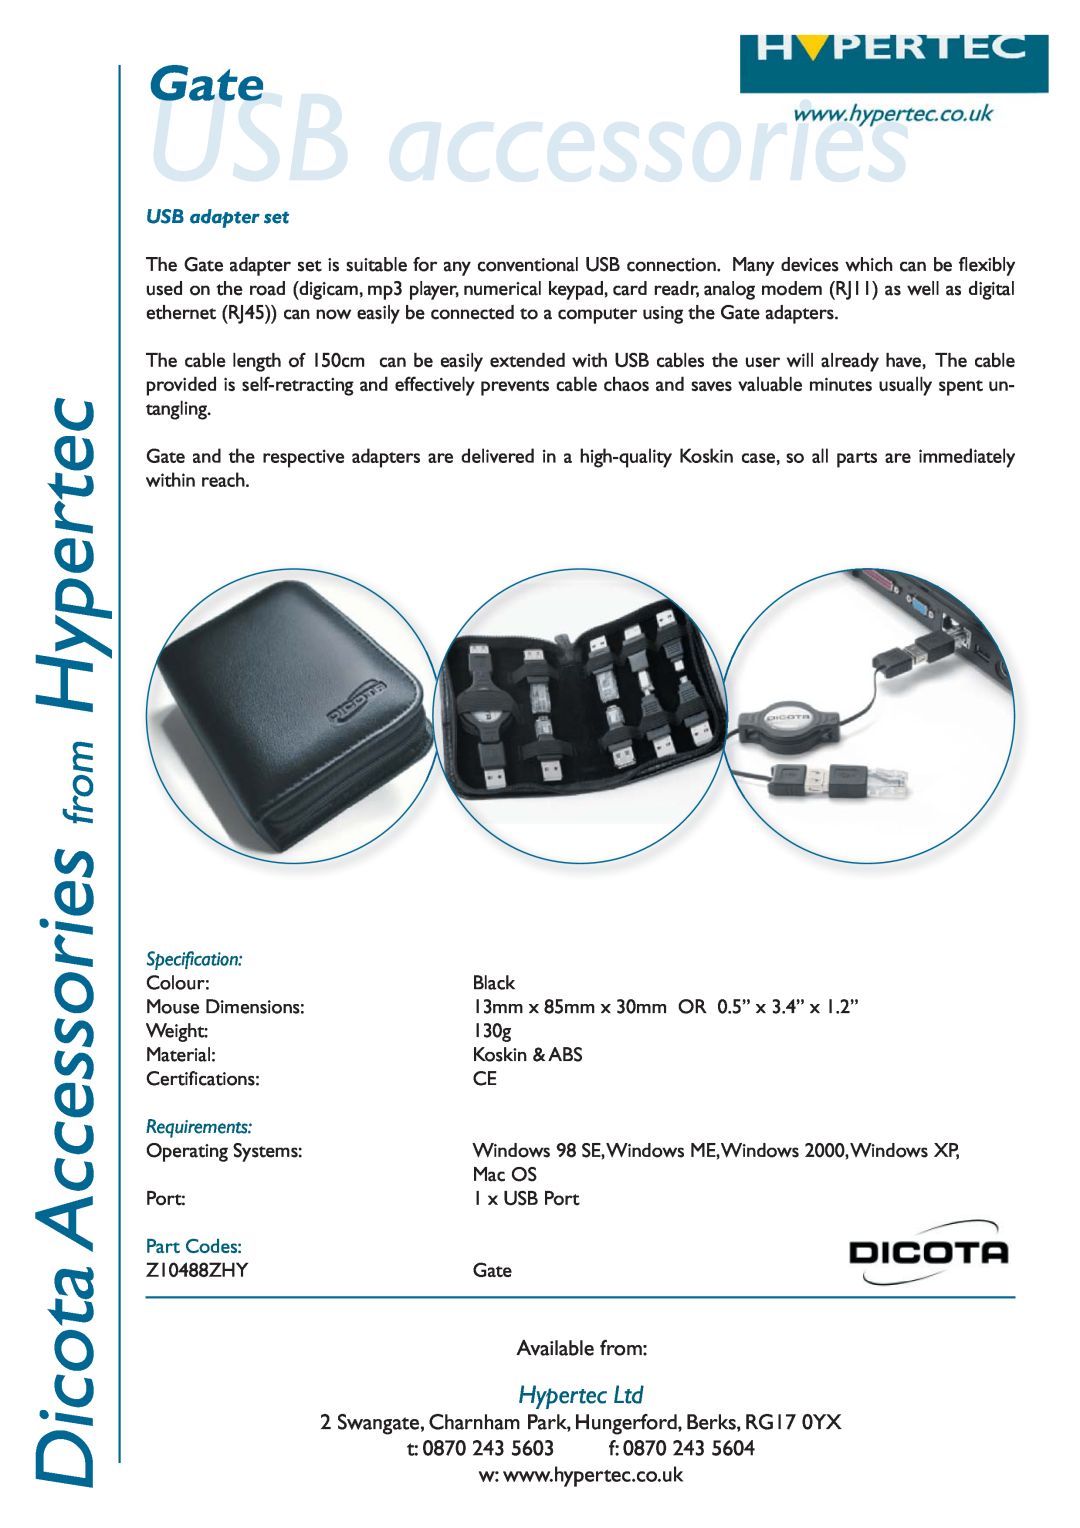 Hypertec Z10488ZHY dimensions USB accessories, Dicota Accessories from Hypertec, Gate, Available from, t 0870, Part Codes 